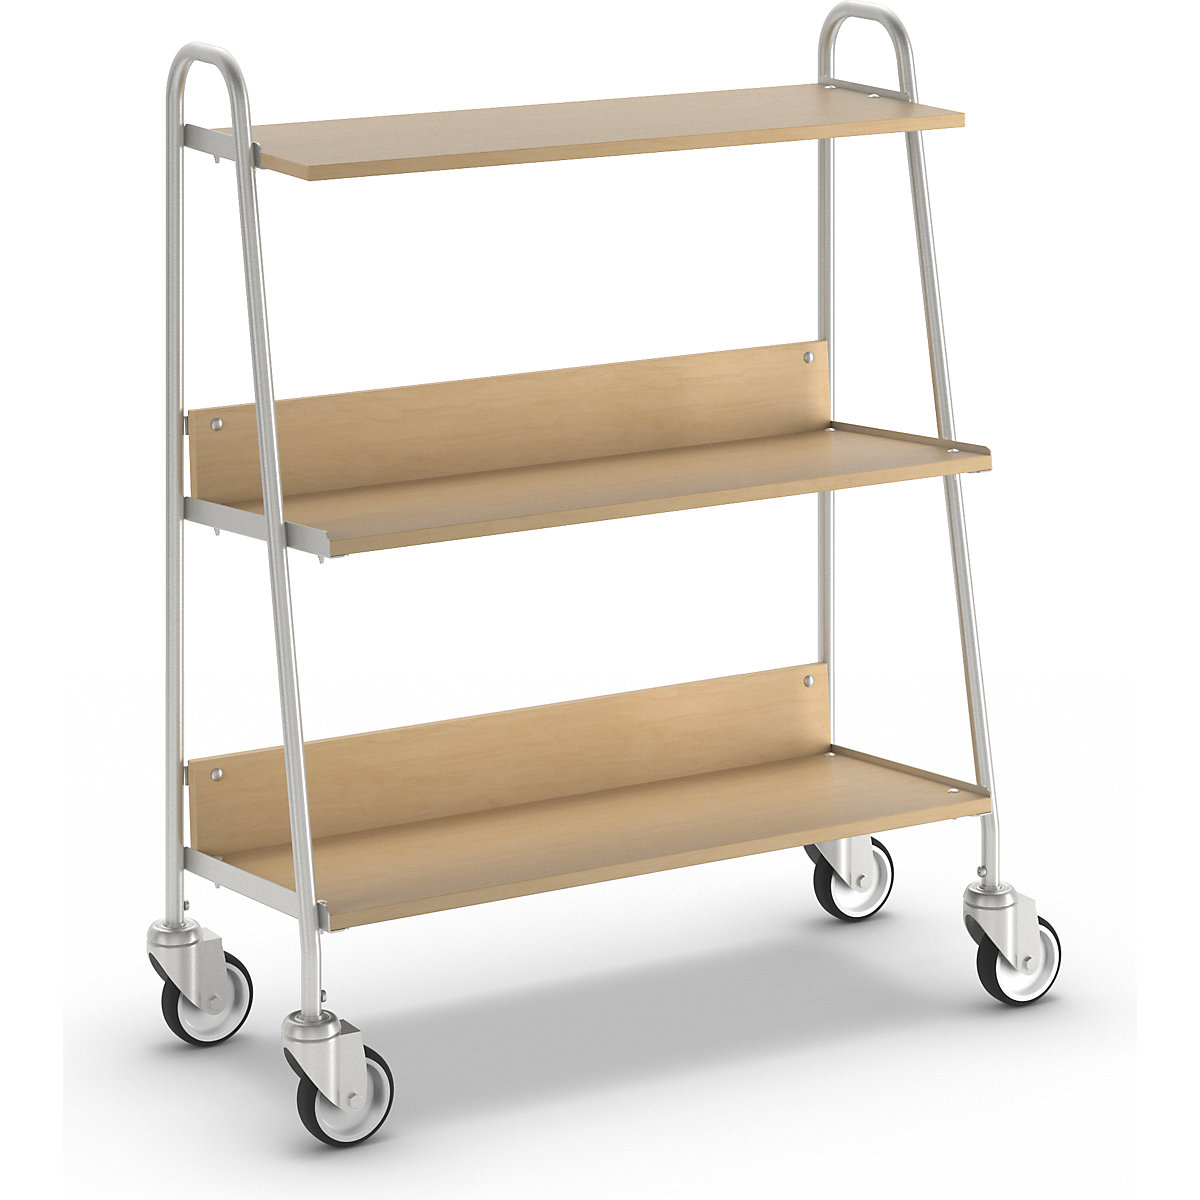 Folder trolley with 2 shelves